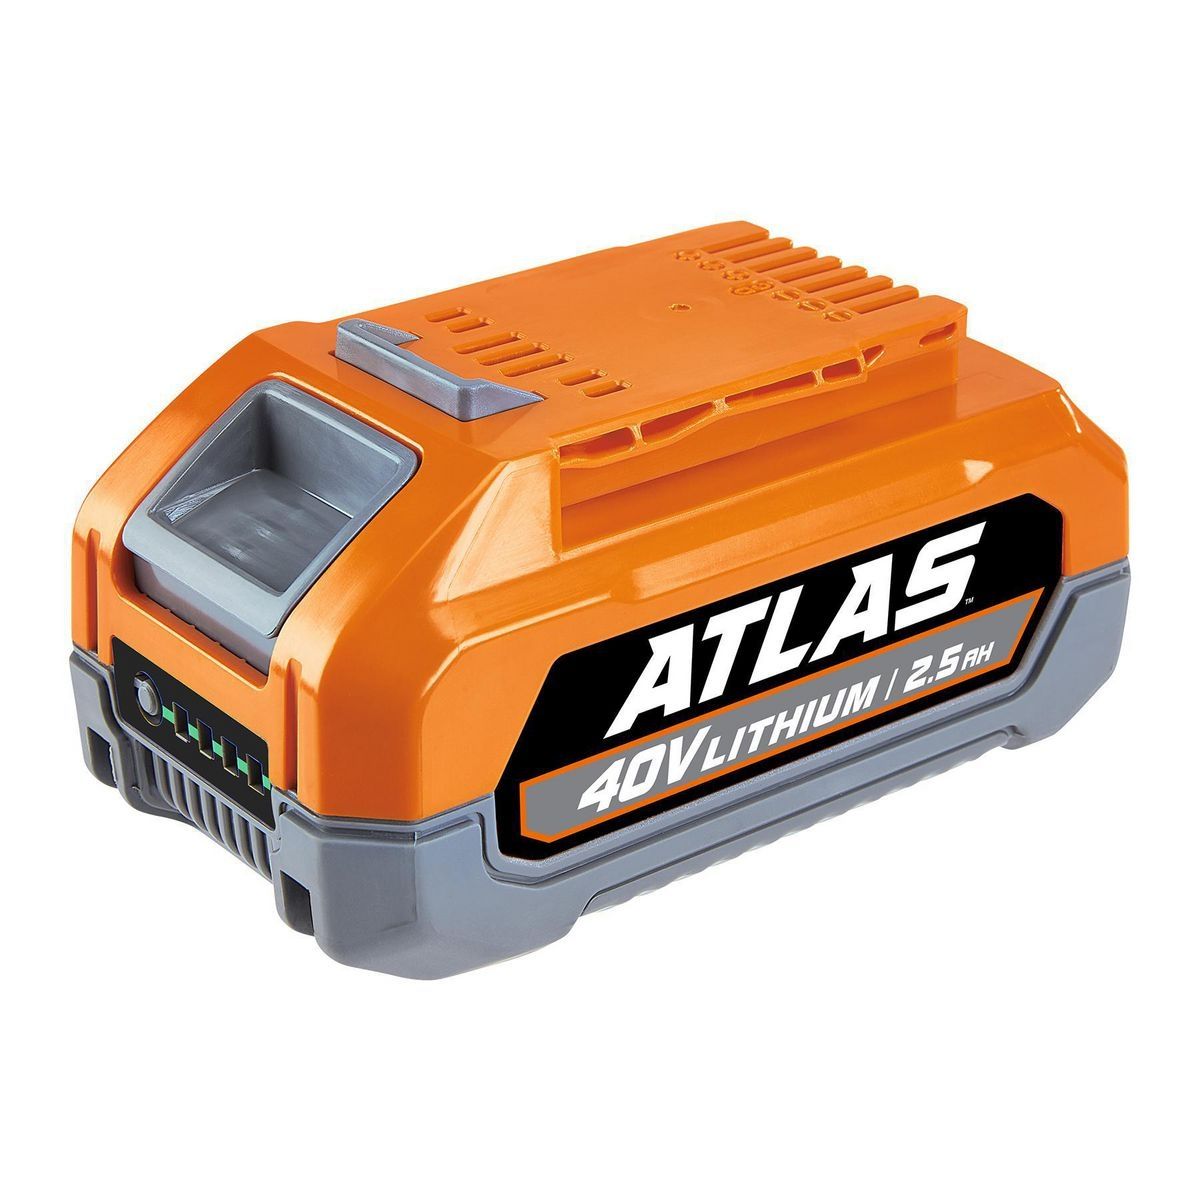 Are Lynx And Atlas Batteries Interchangeable